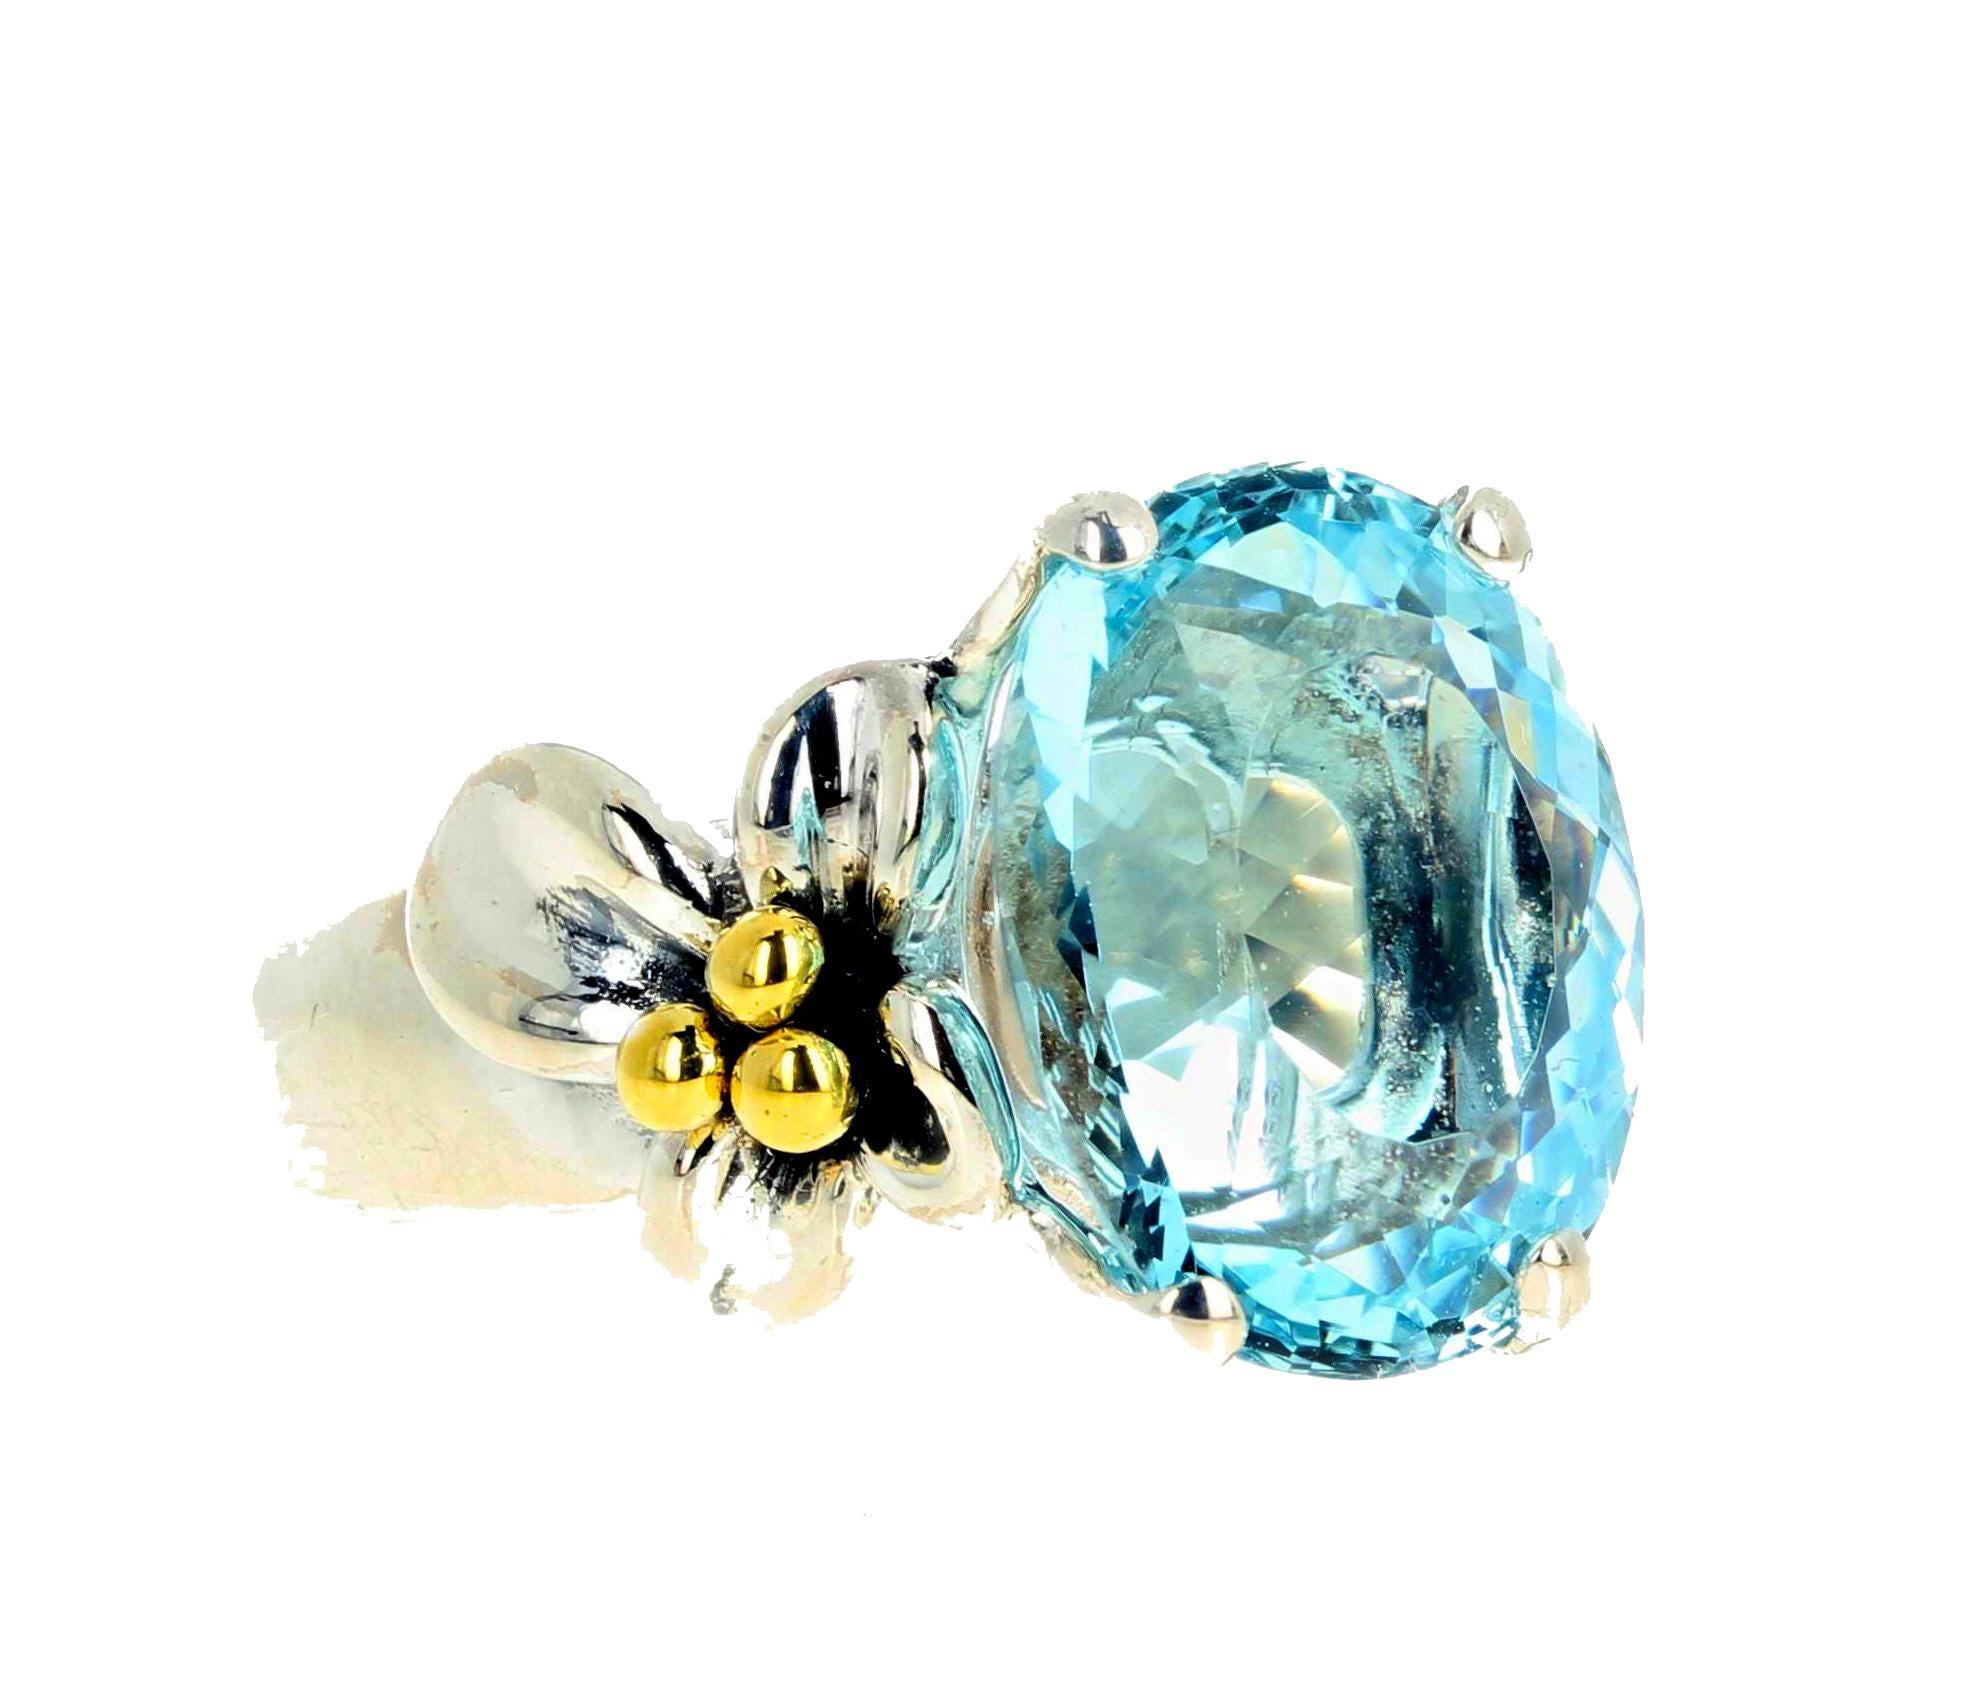 This gorgeous natural 11 Carat intense blue Aquamarine is 16mm x 13.5mm set in an 18K yellow gold and sterling silver  ring size 7 sizable.  This comes from one of the most famous mines in the world and is intensely blue and glittery with no eye